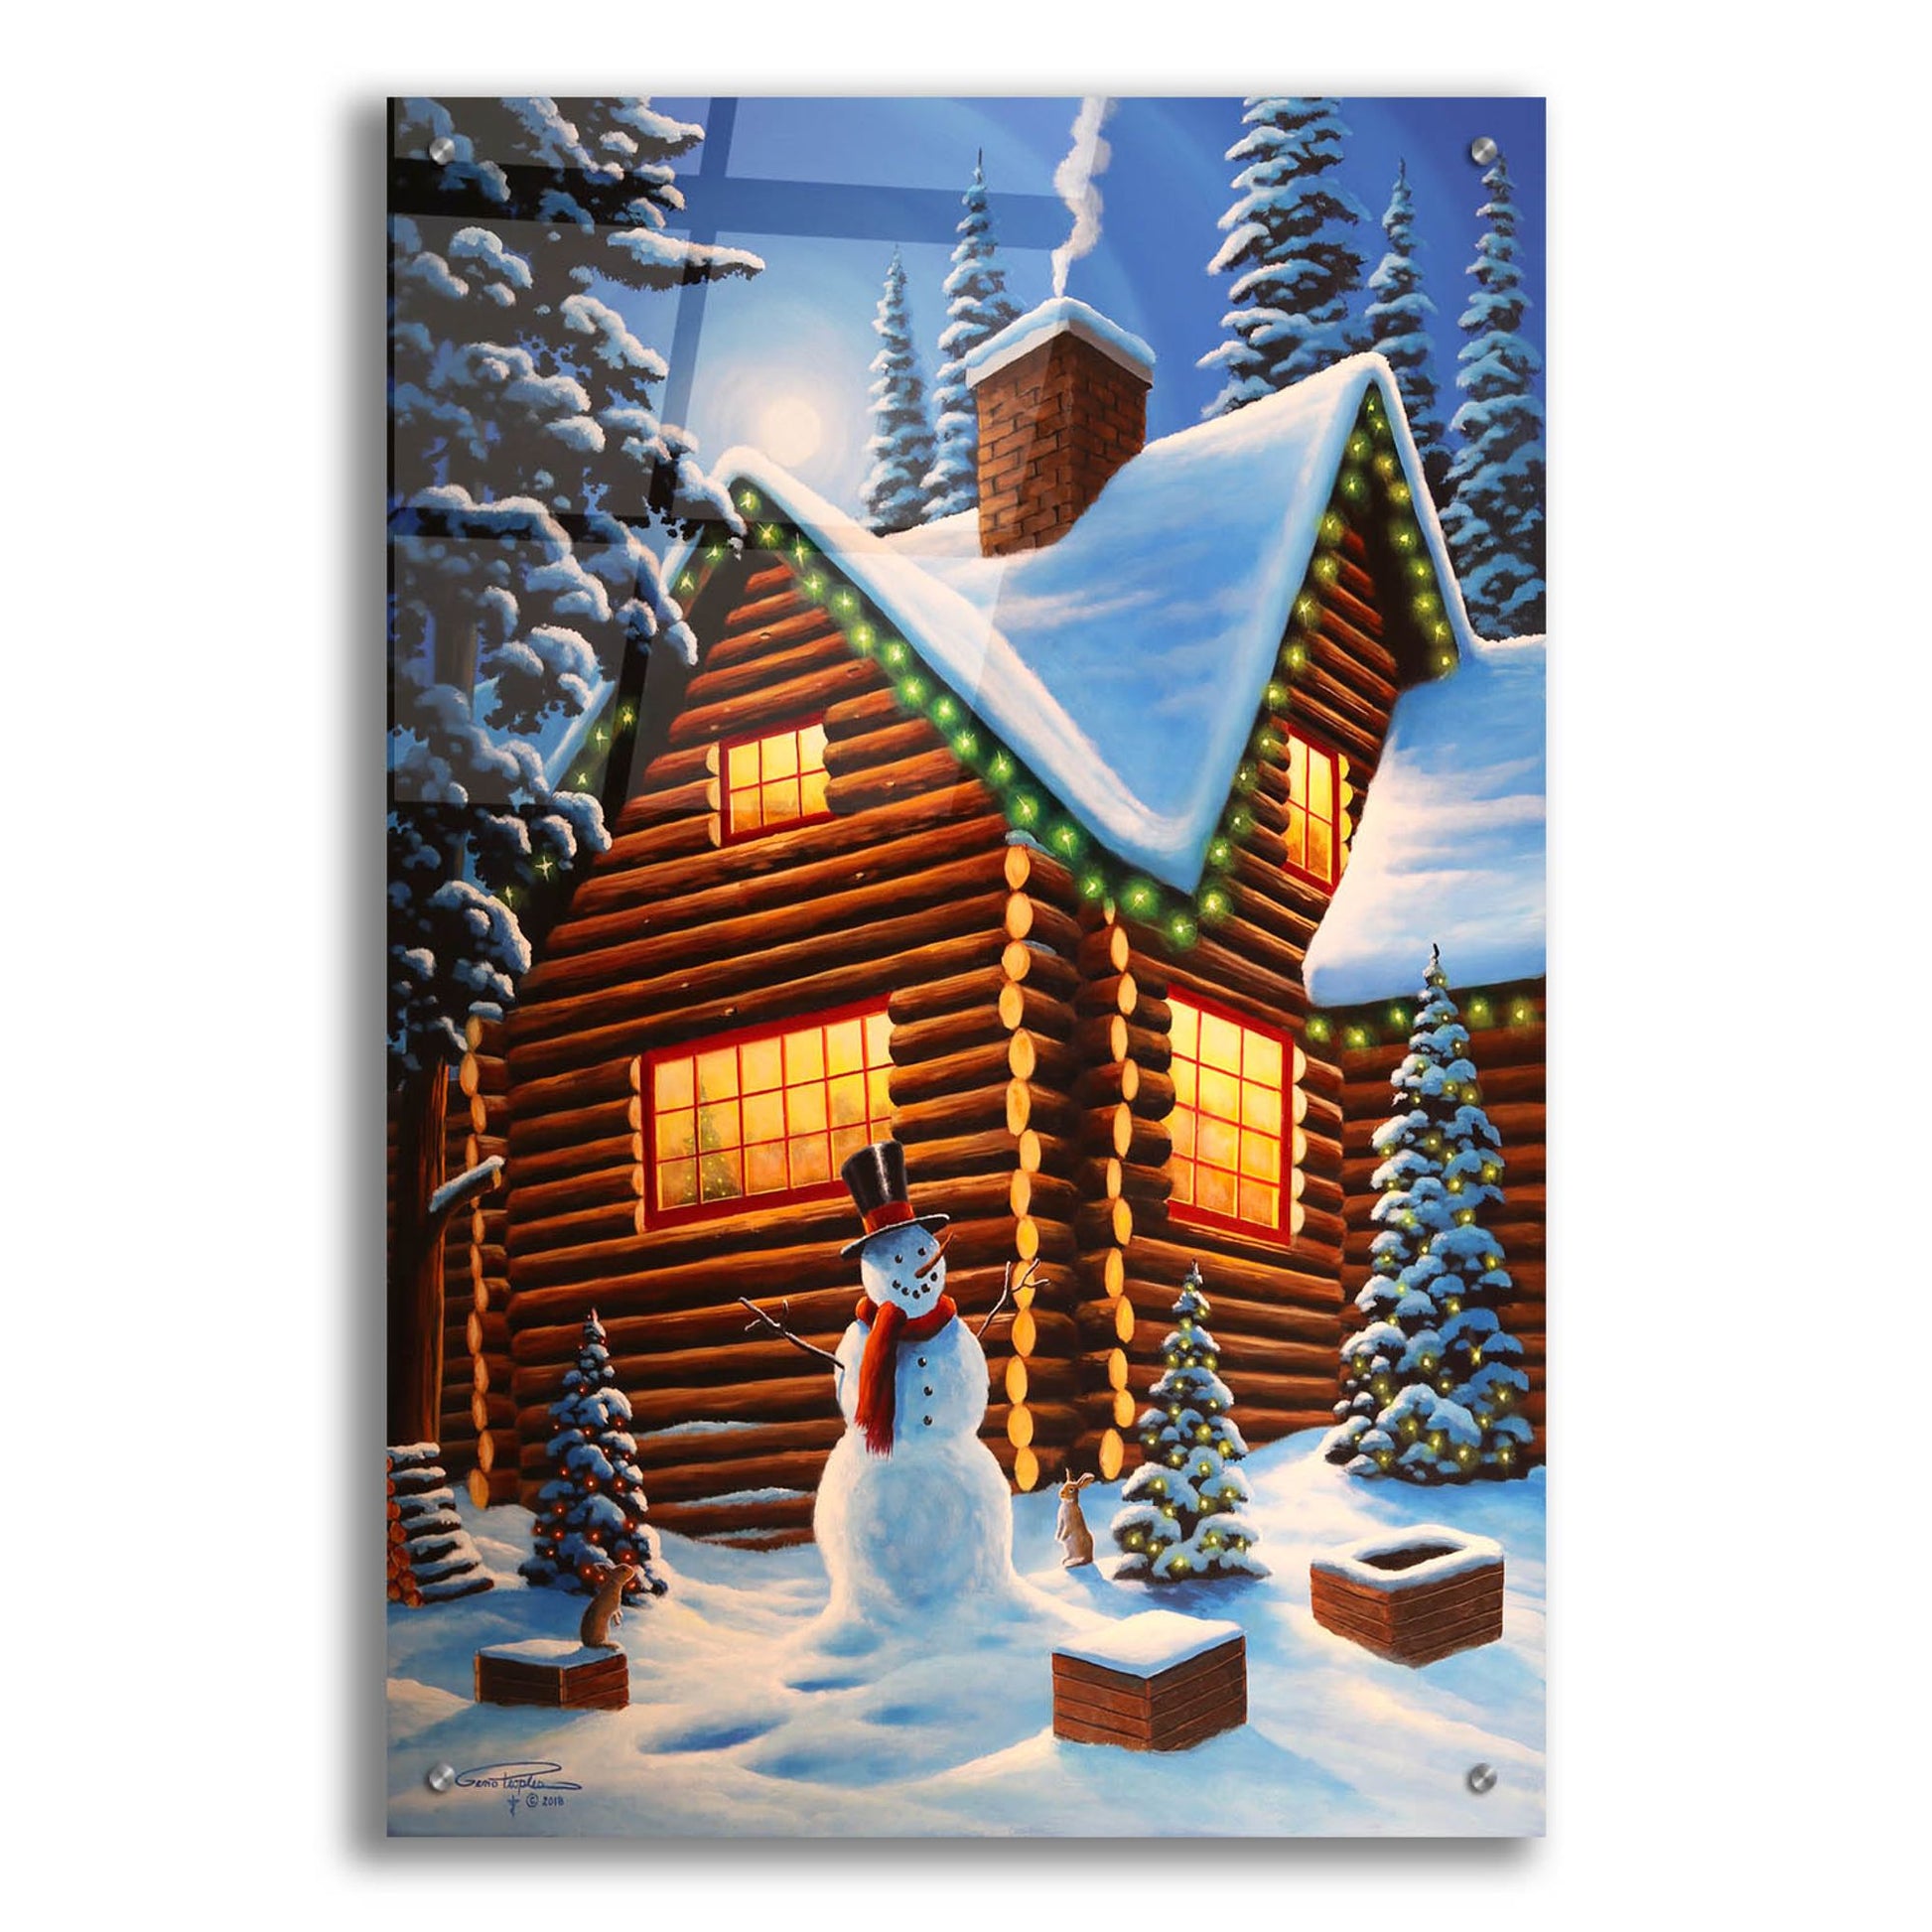 Epic Art 'Cozy Christmas' by Geno Peoples, Acrylic Glass Wall Art,24x36